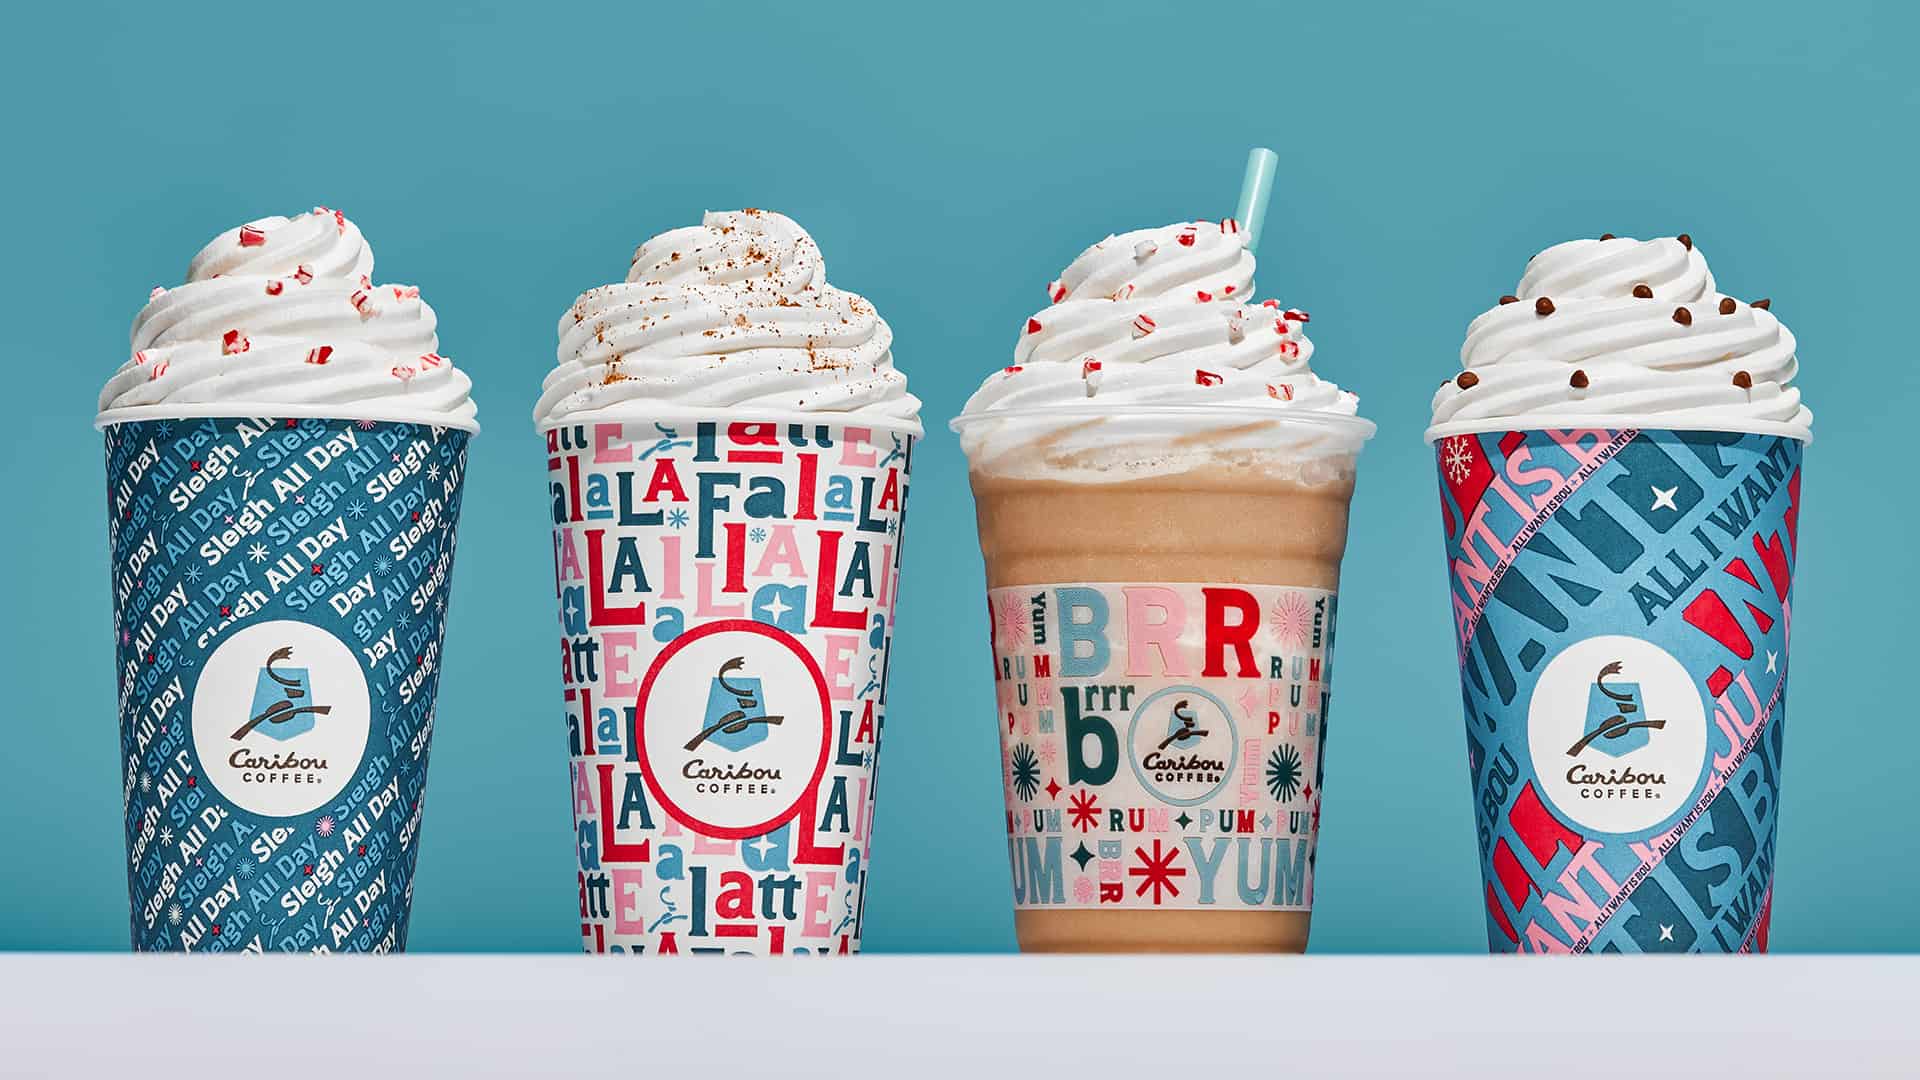 Four coffee drinks with whipped cream in festive cups on a blue background